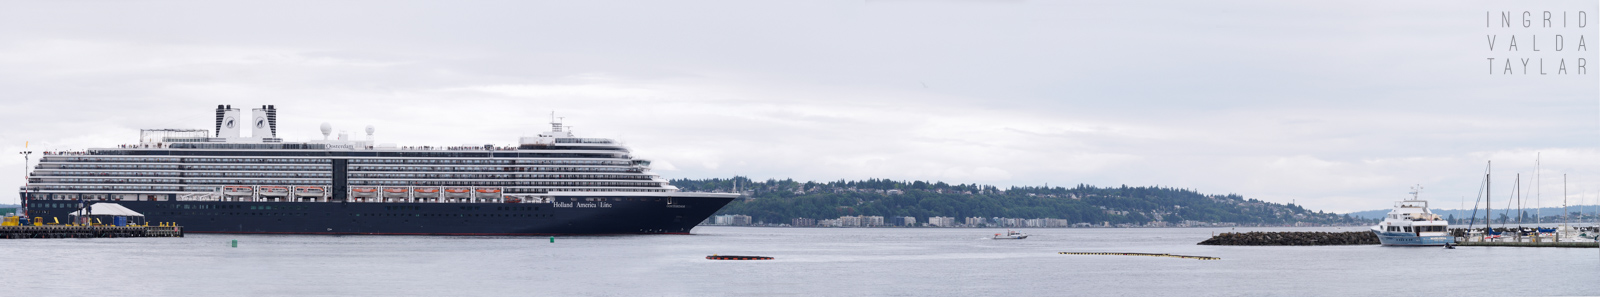 Stitched Panorama of Holland America Cruise Ship Leaving Seattle